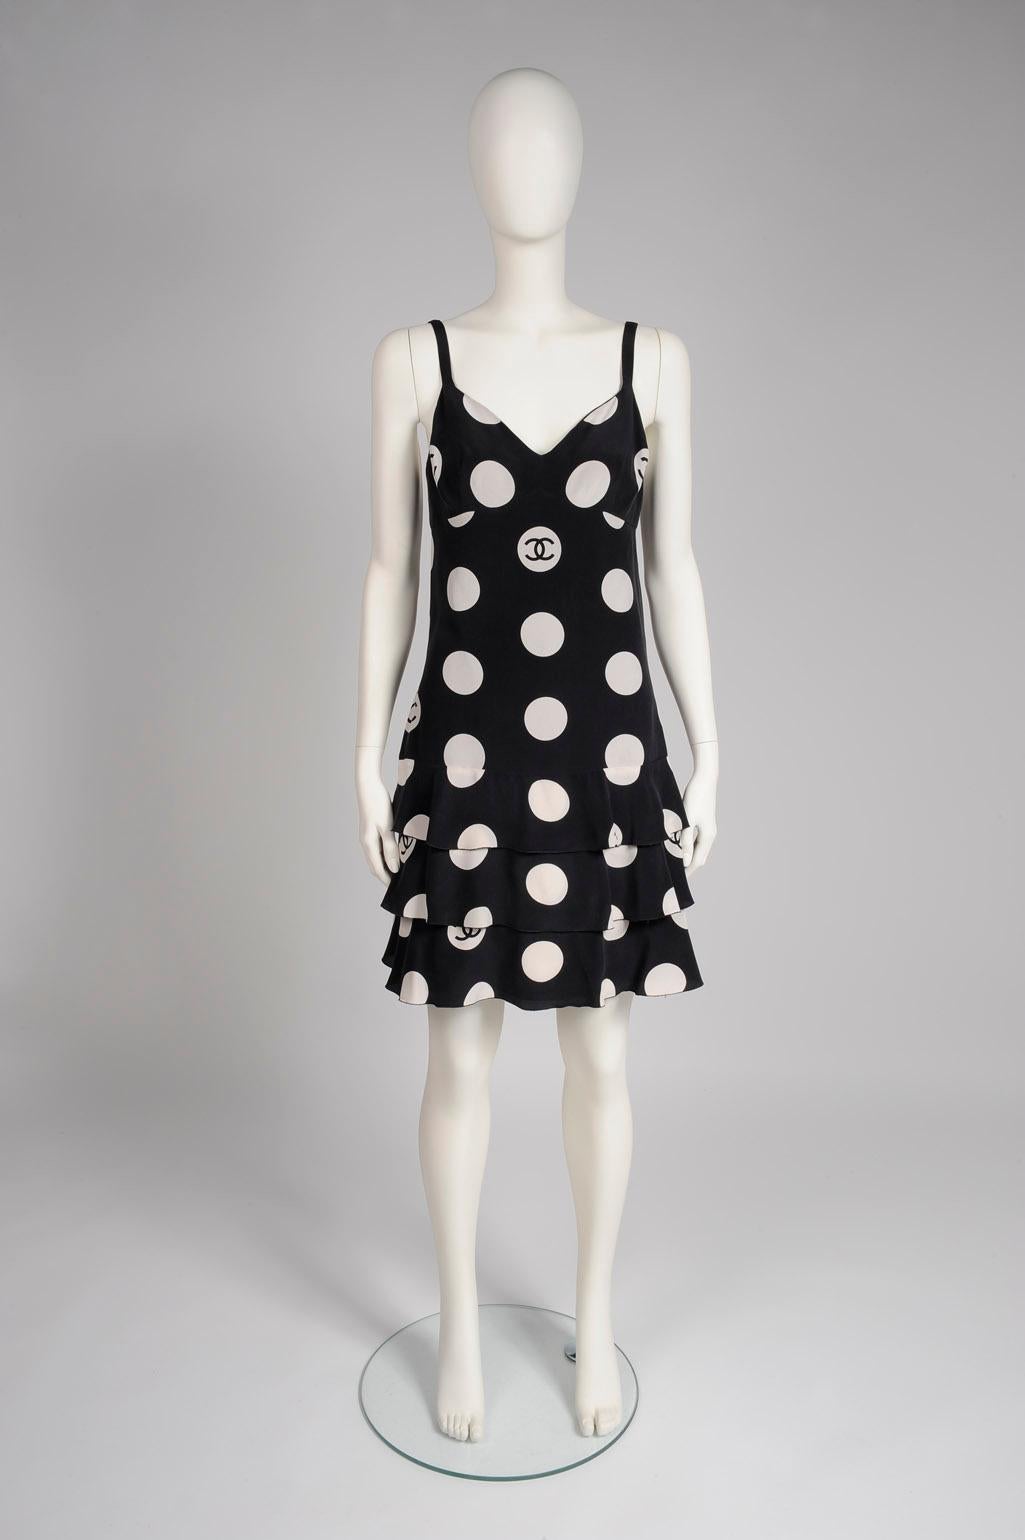 There's never a wrong time for polka dots. Especially when they are part of Rihanna's wardrobe and their daddy is Karl Lagerfeld for Chanel ! From the 1997 Spring-Summer collection, this shift dress is just what you'll want to slip into on balmy